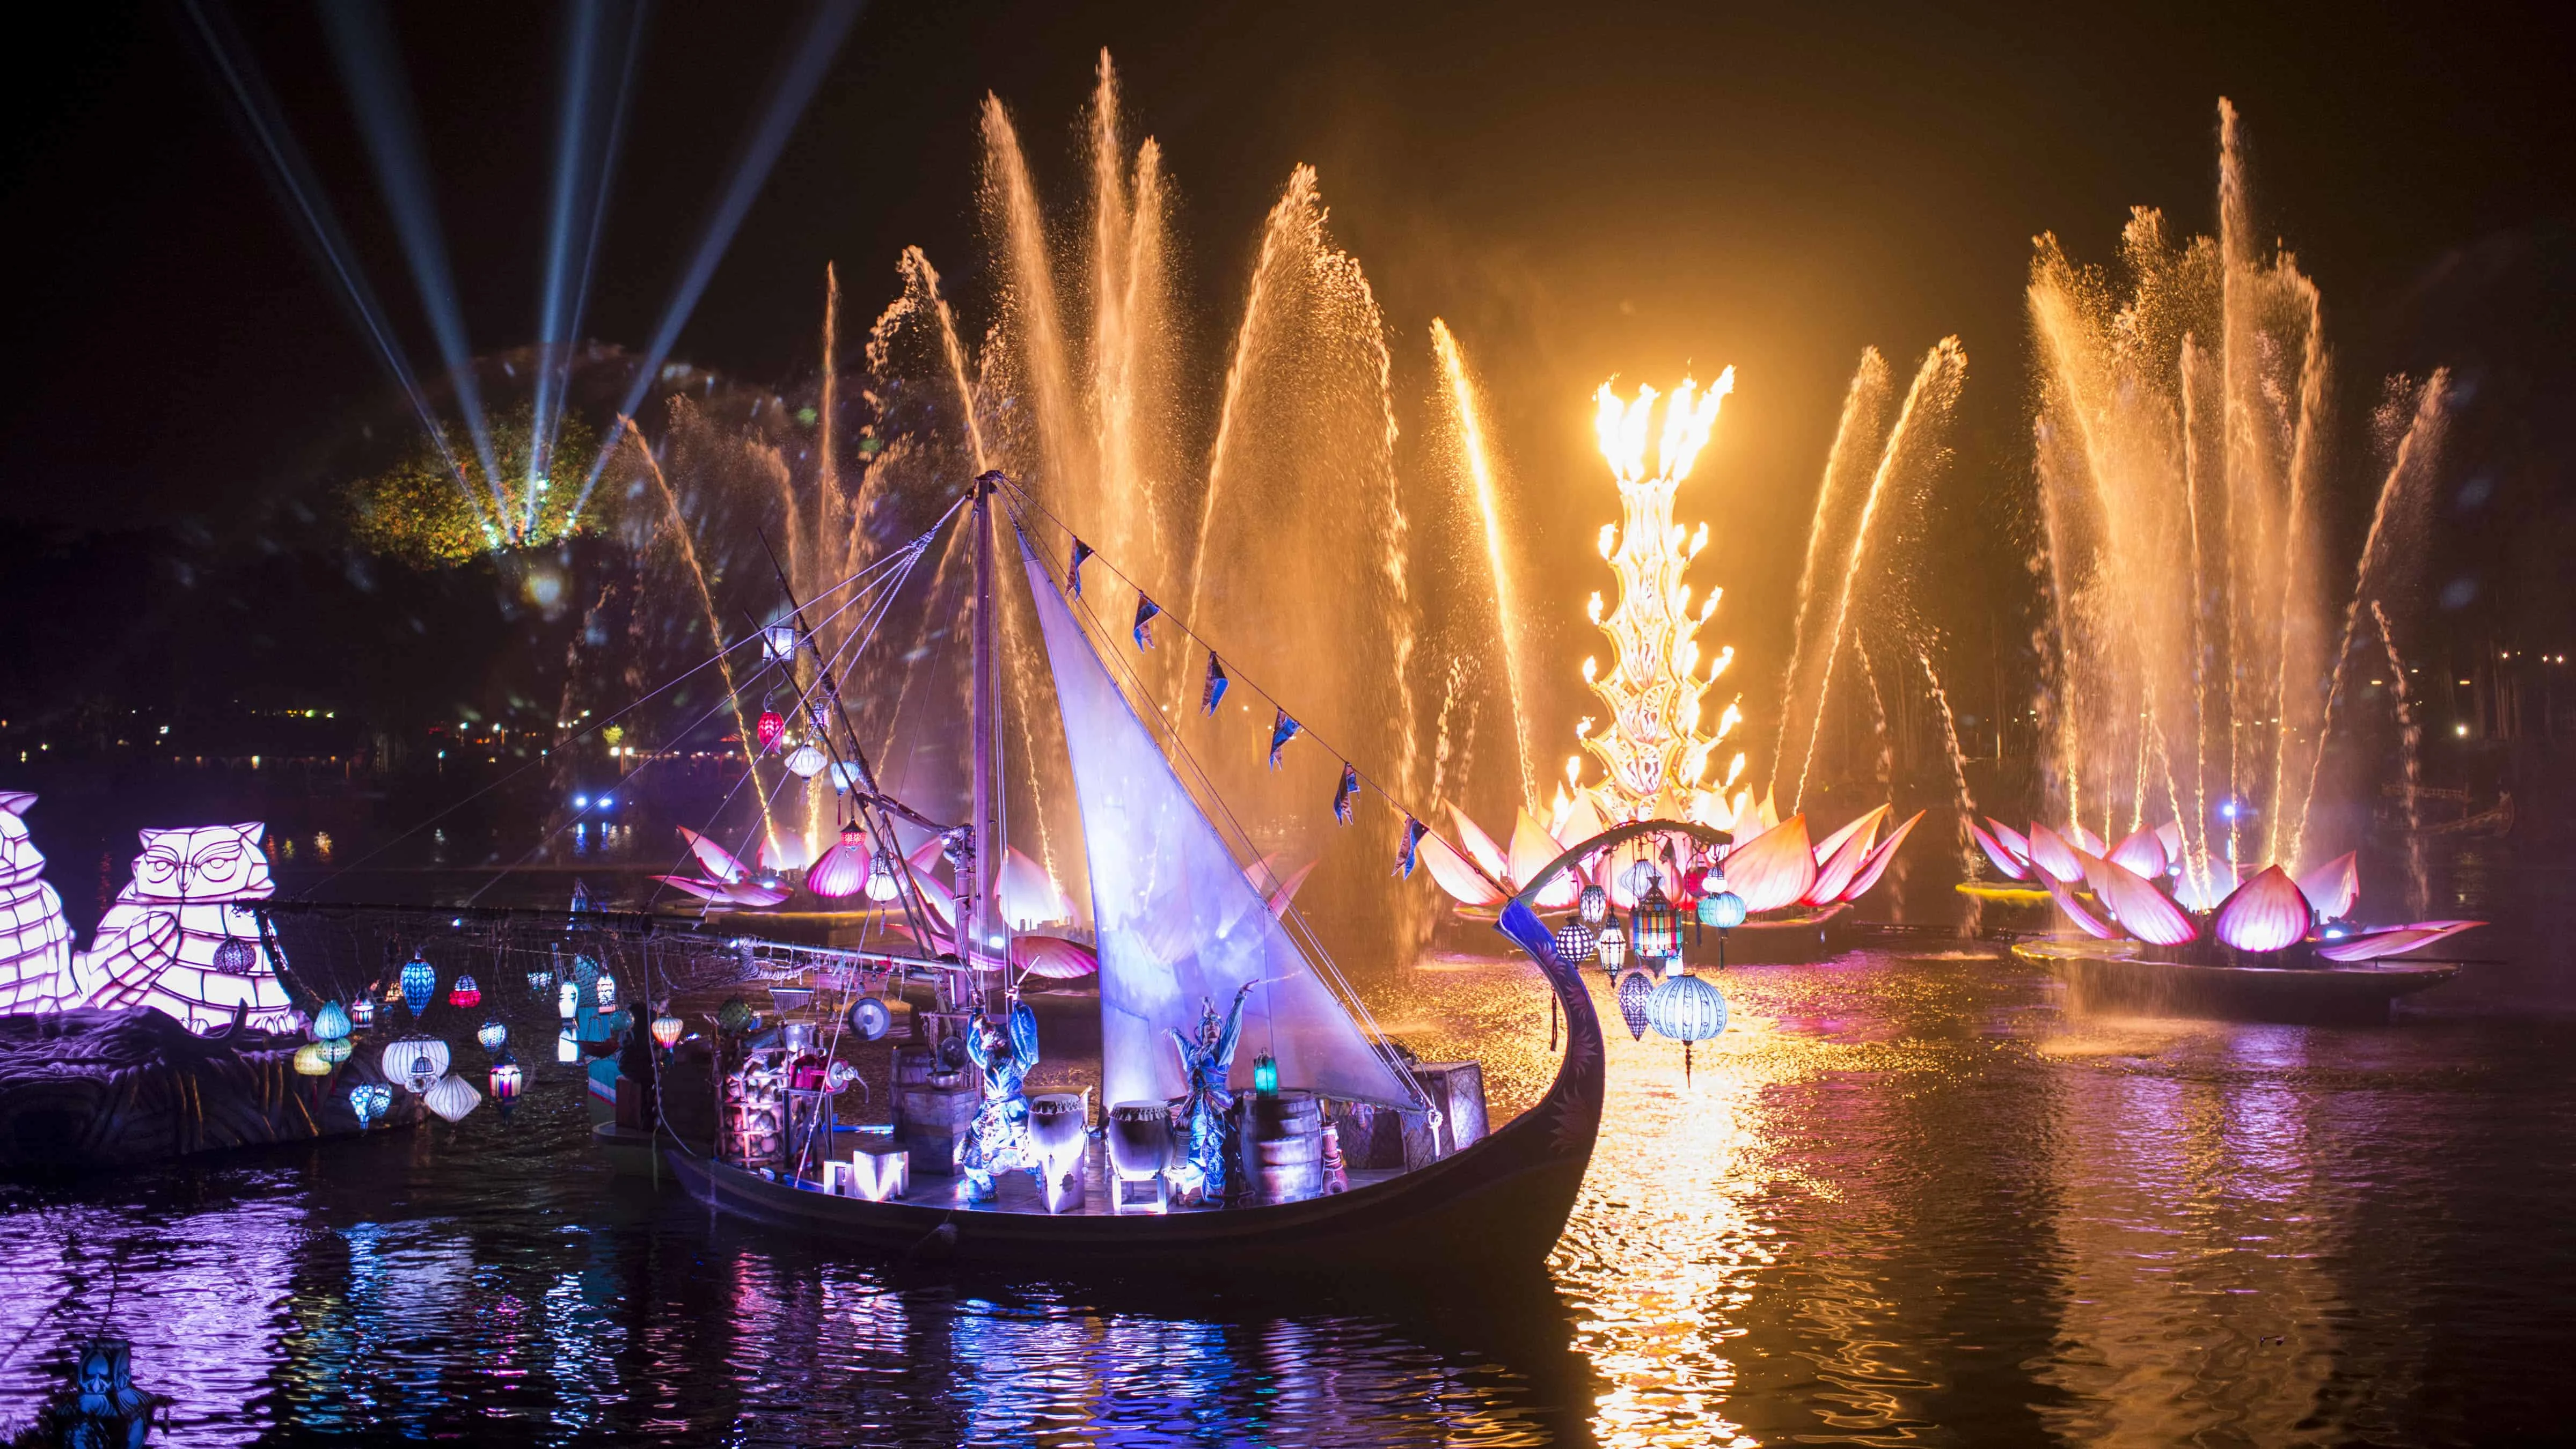 Animal Kingdom’s new Rivers of Light nighttime experience brings the beauty of nature to life with color changing floats, fountains, water screens, music, and much more. 